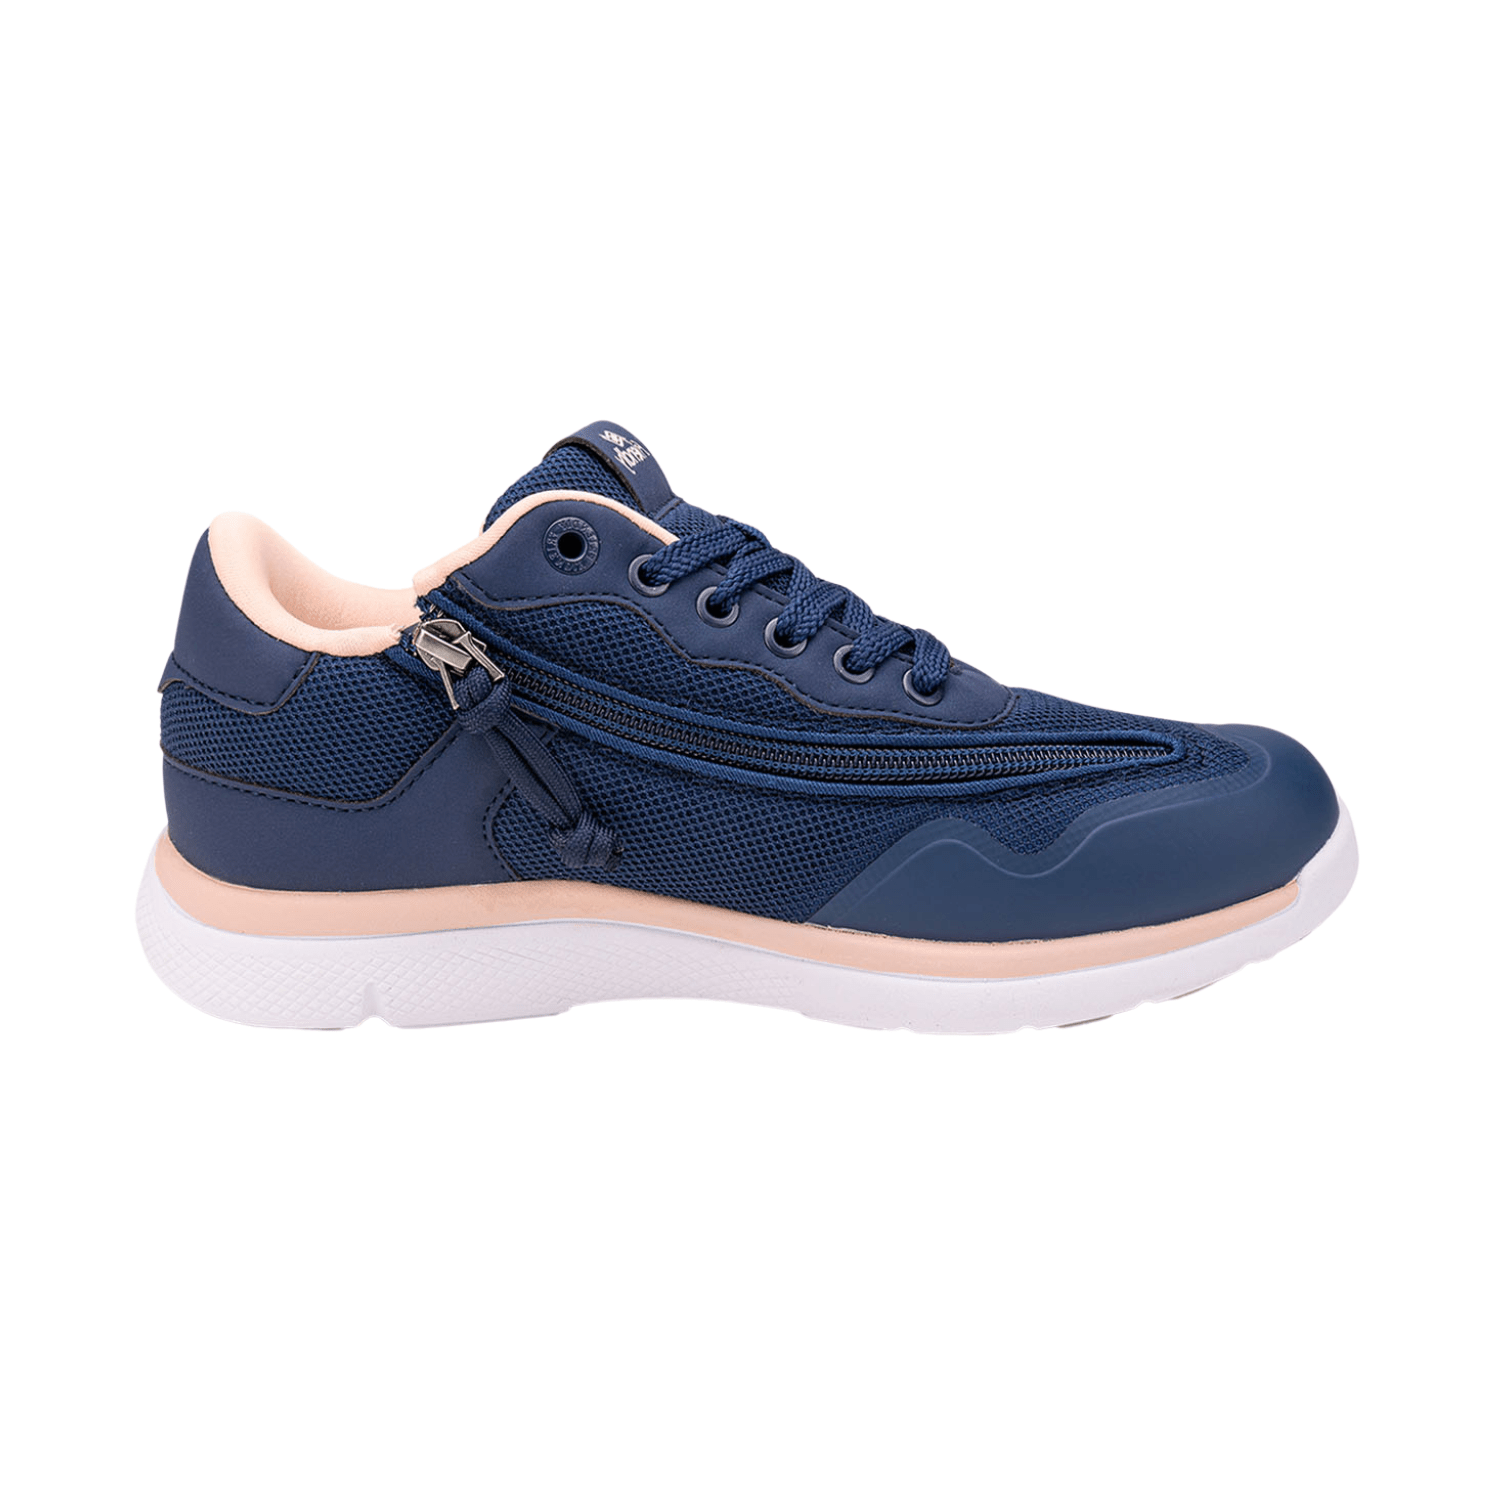 Voyage Navy Blue & Peach Women\'s Shoe - Friendly Shoes - The Shoe for All  Abilities